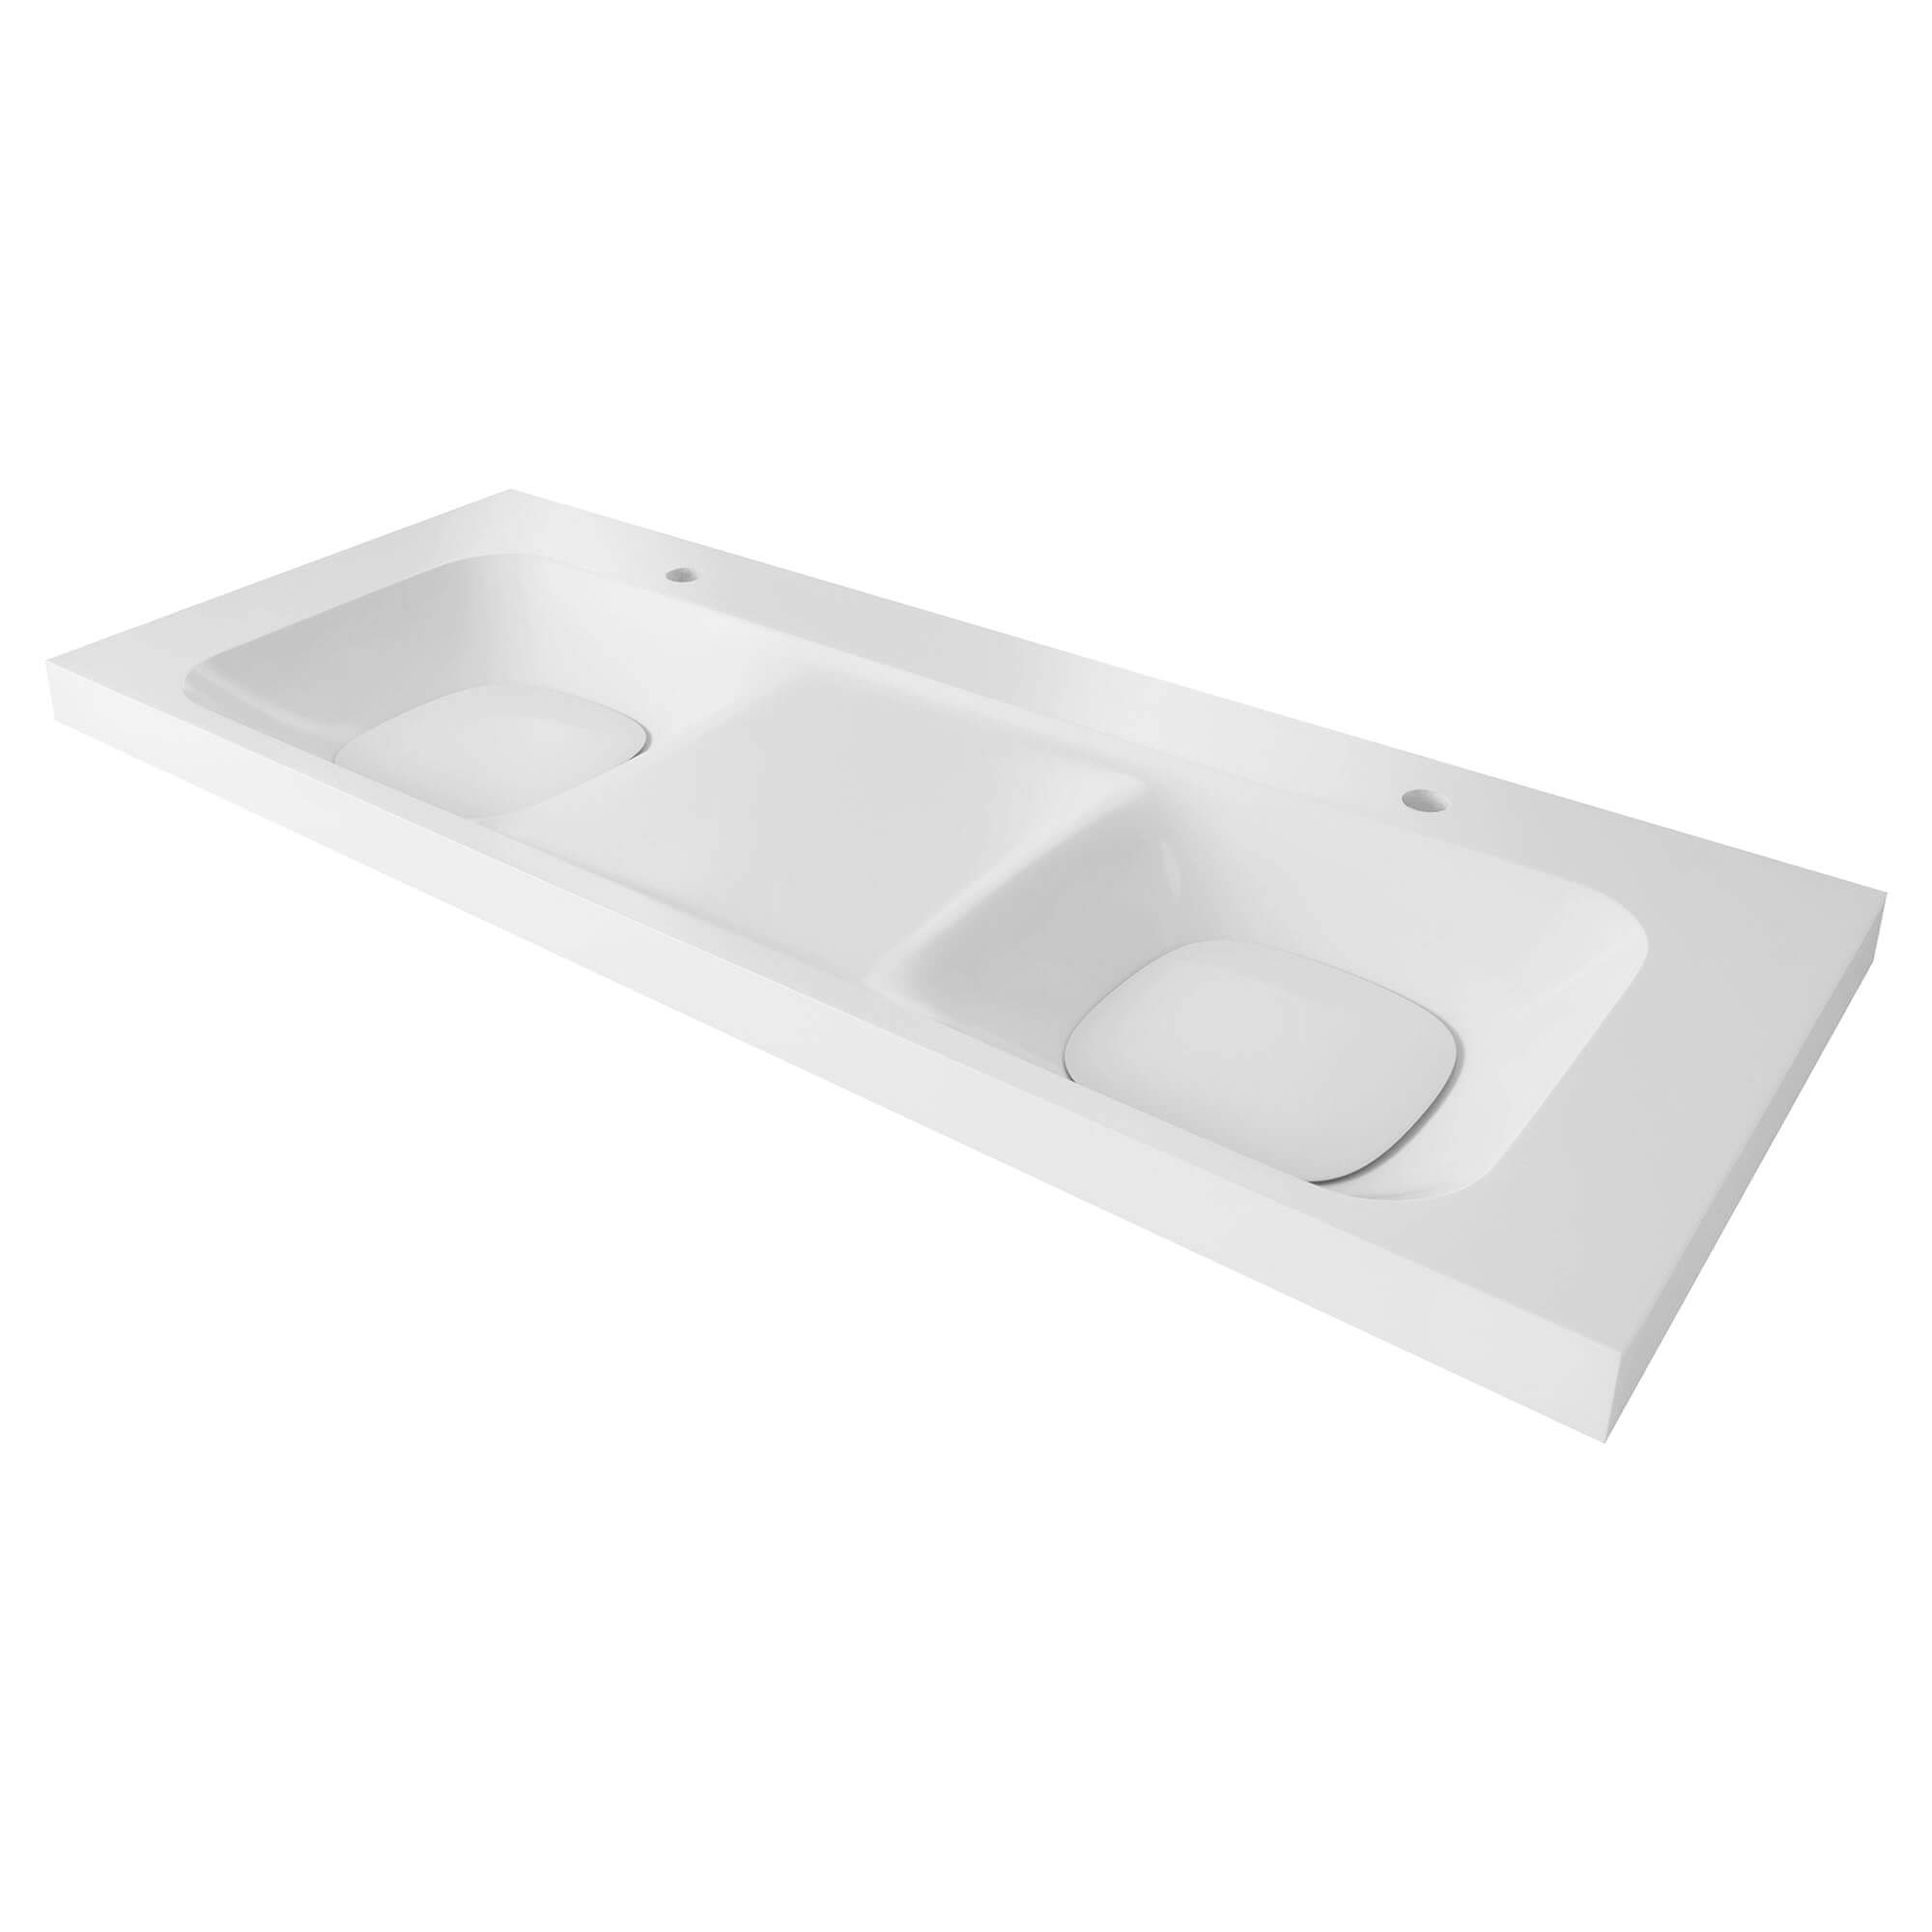 DXV MODULUS 55-INCH DOUBLE BATHROOM SINK - TWO SINGLE-HOLES